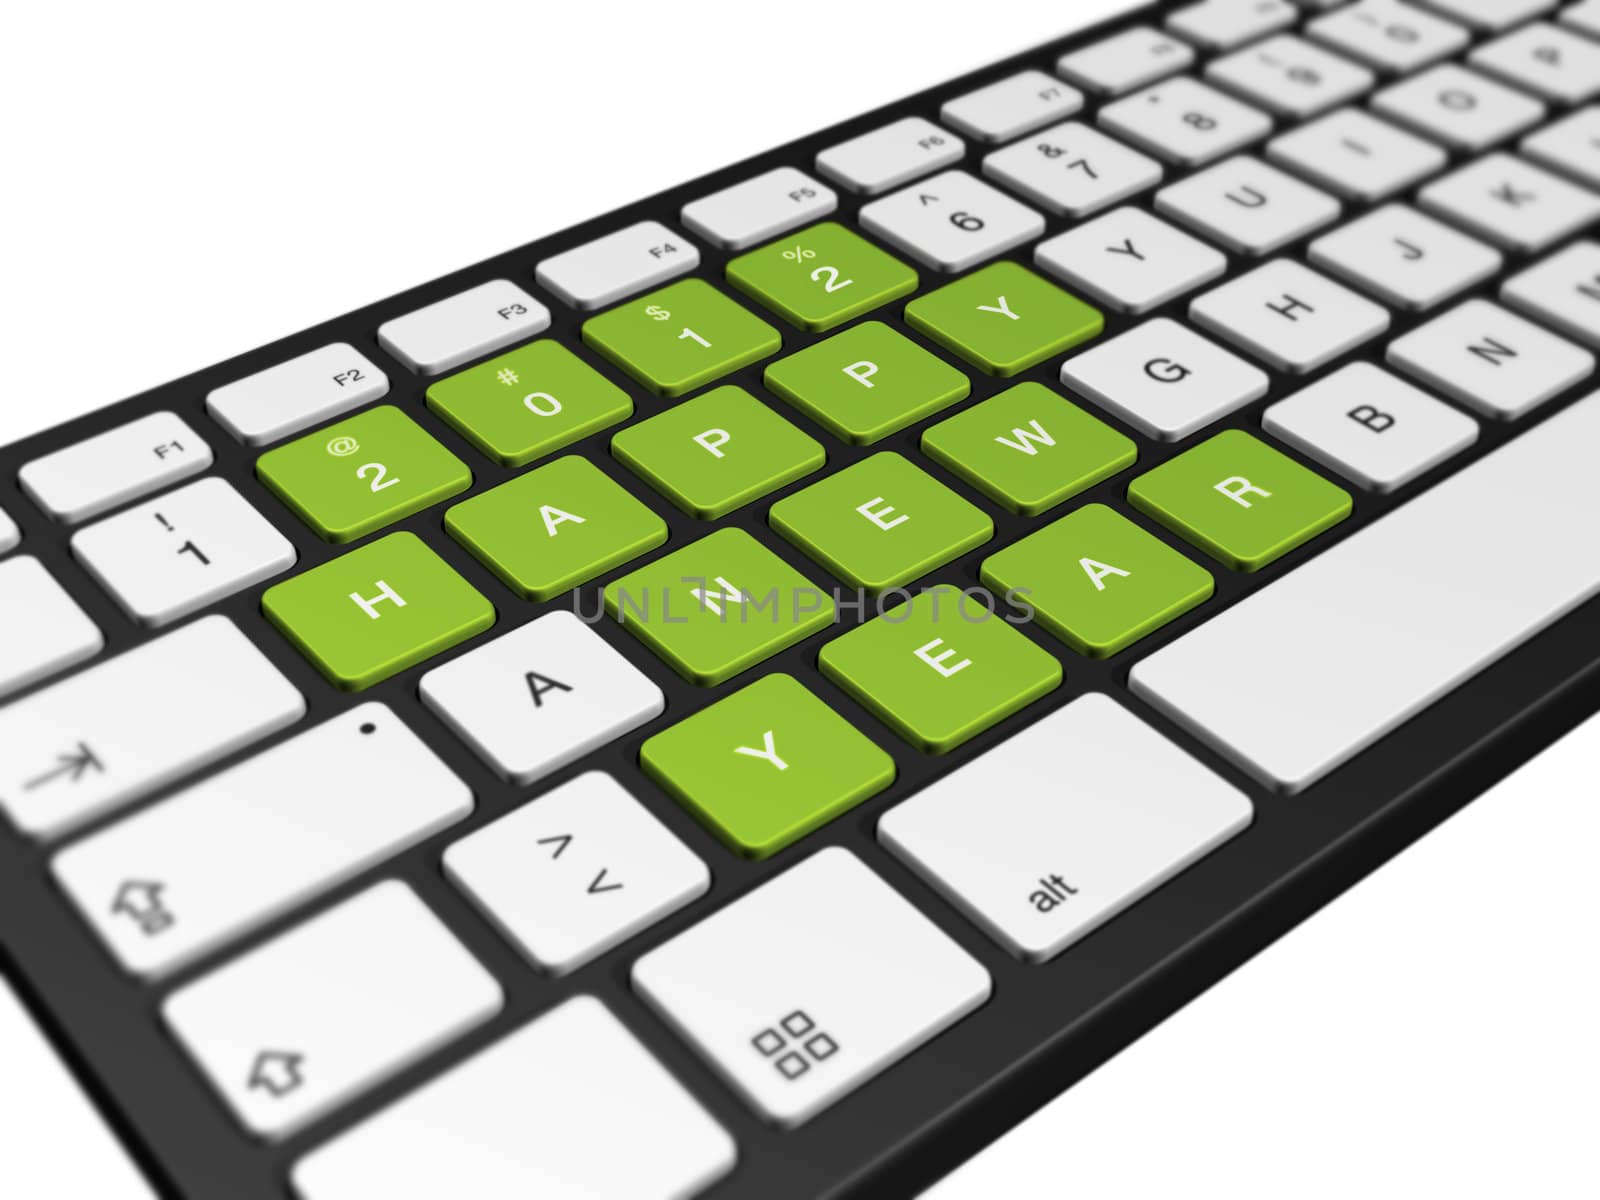 New year 2012 message on a computer keyboard, 3d illustration isolated on white